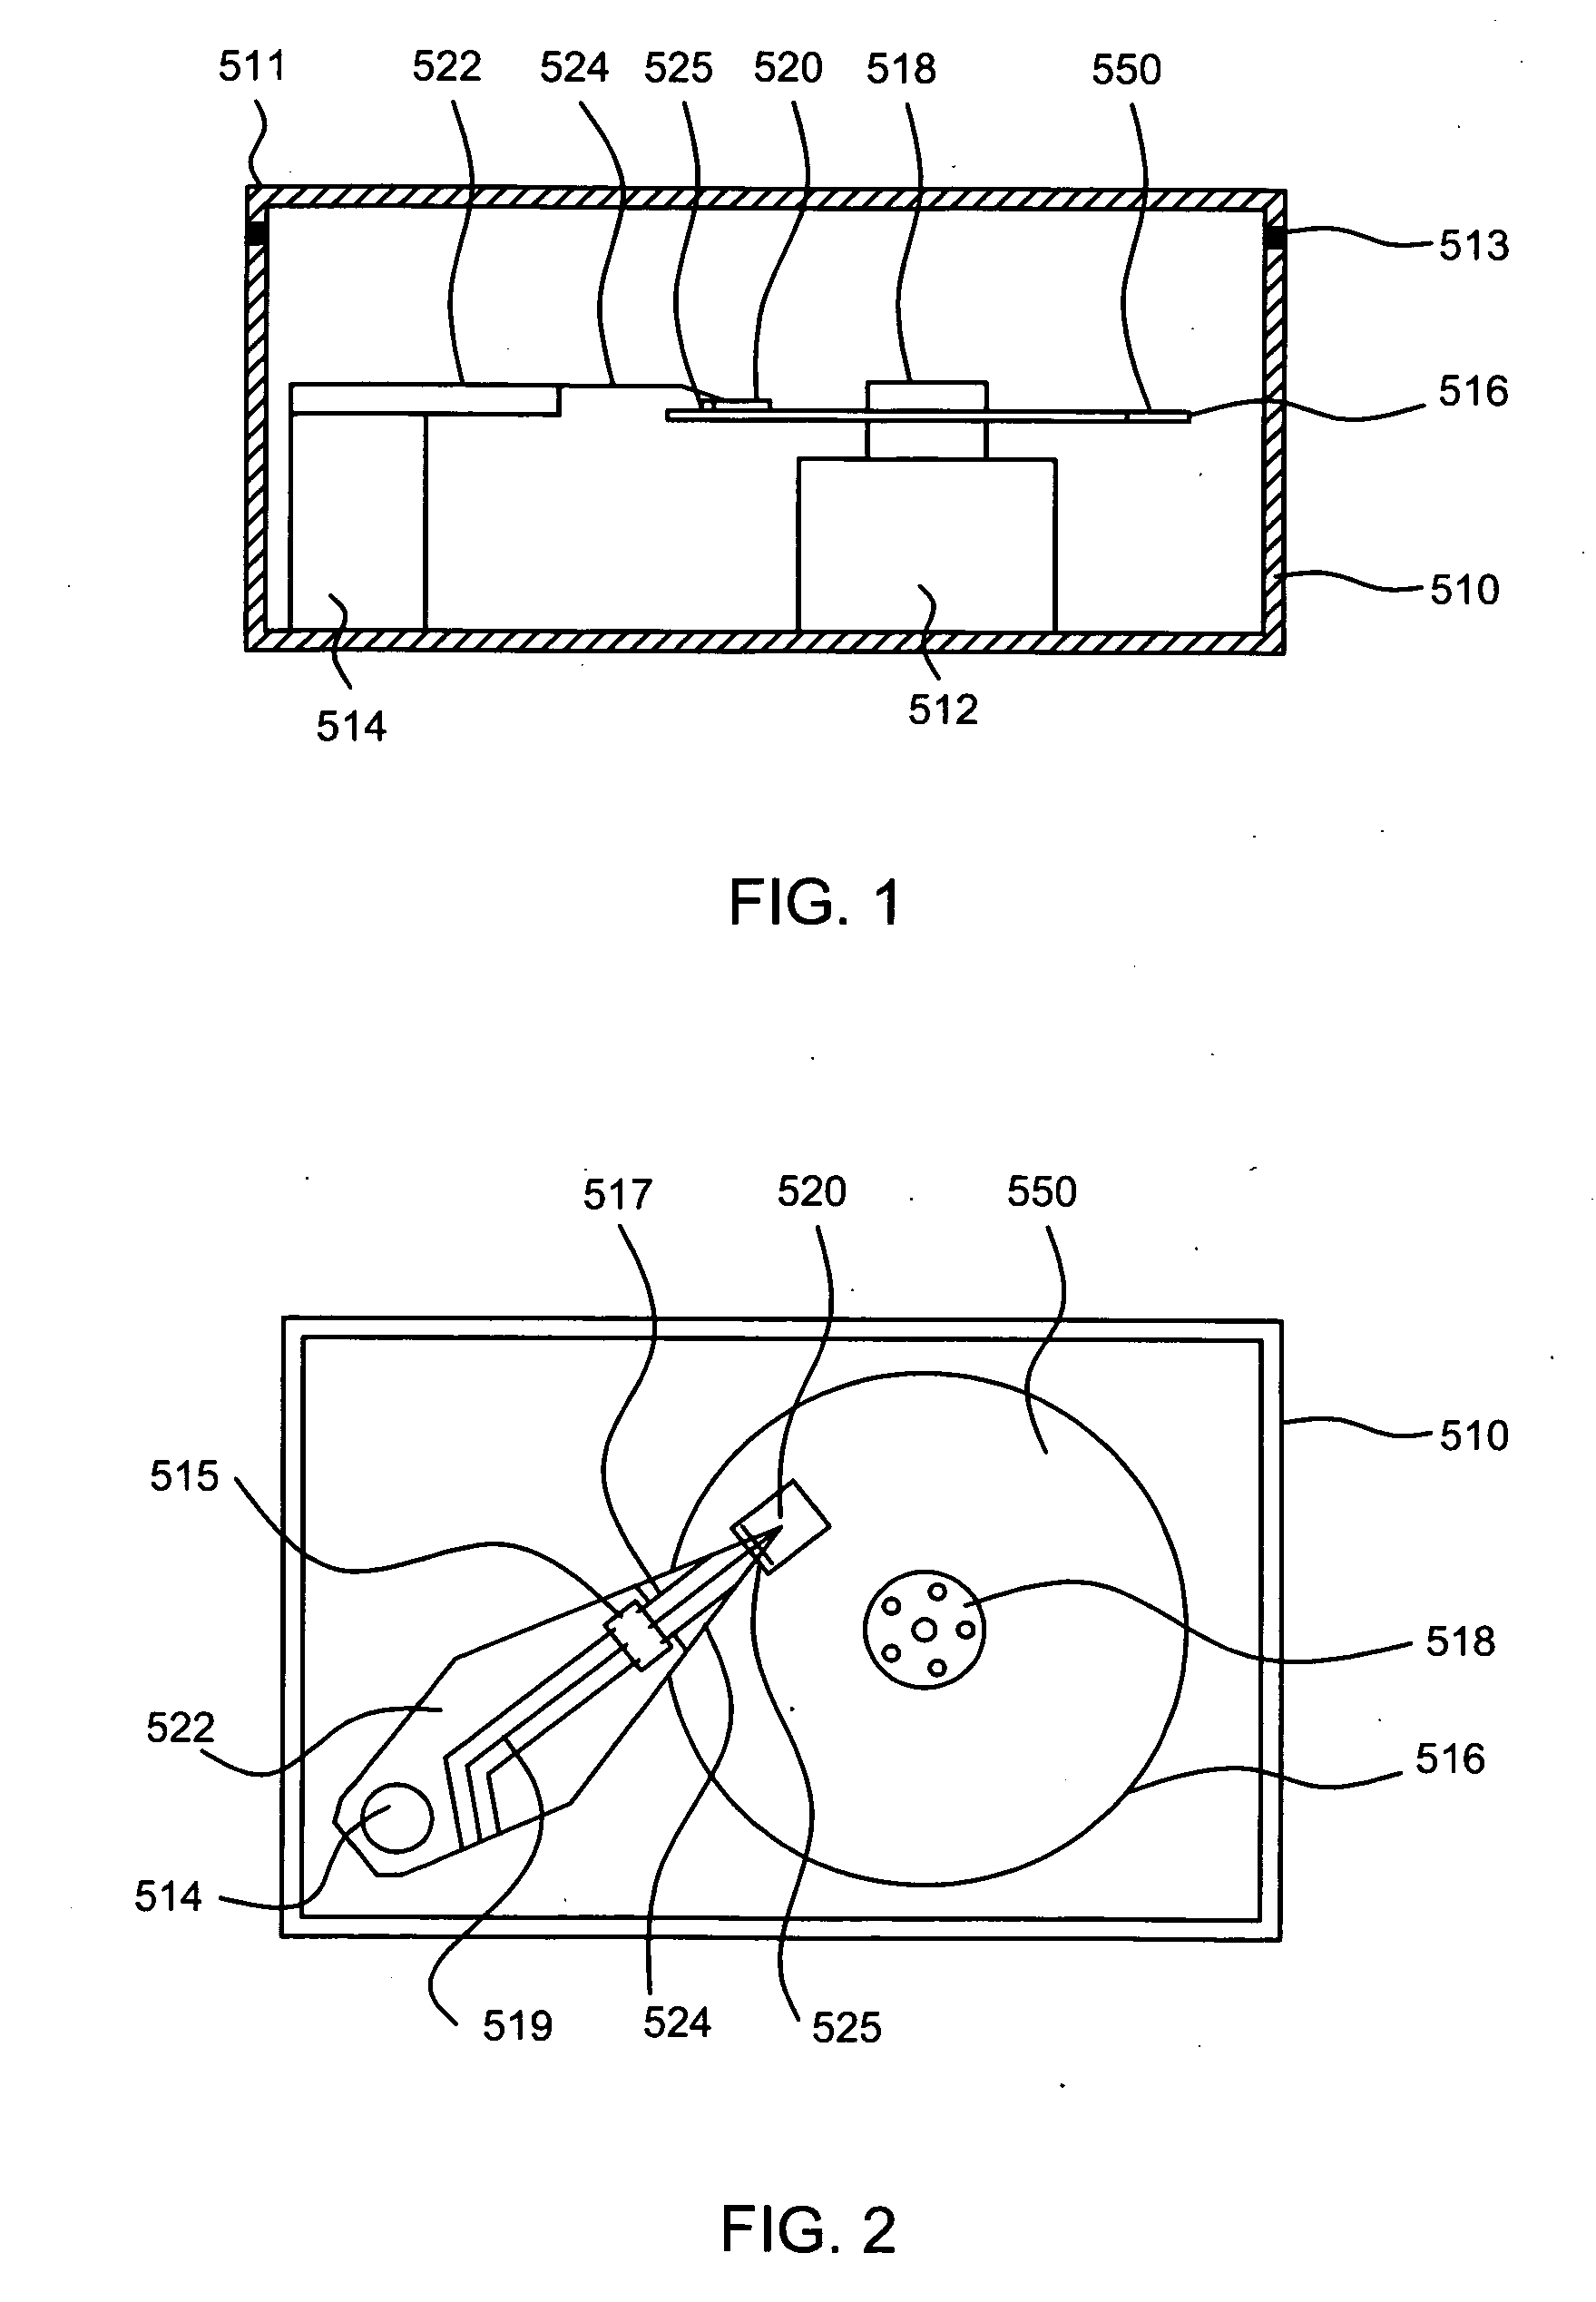 Three terminal magnetic sensor having an in-stack longitudinal biasing layer structure in the collector region and a pinned layer structure in the emitter region